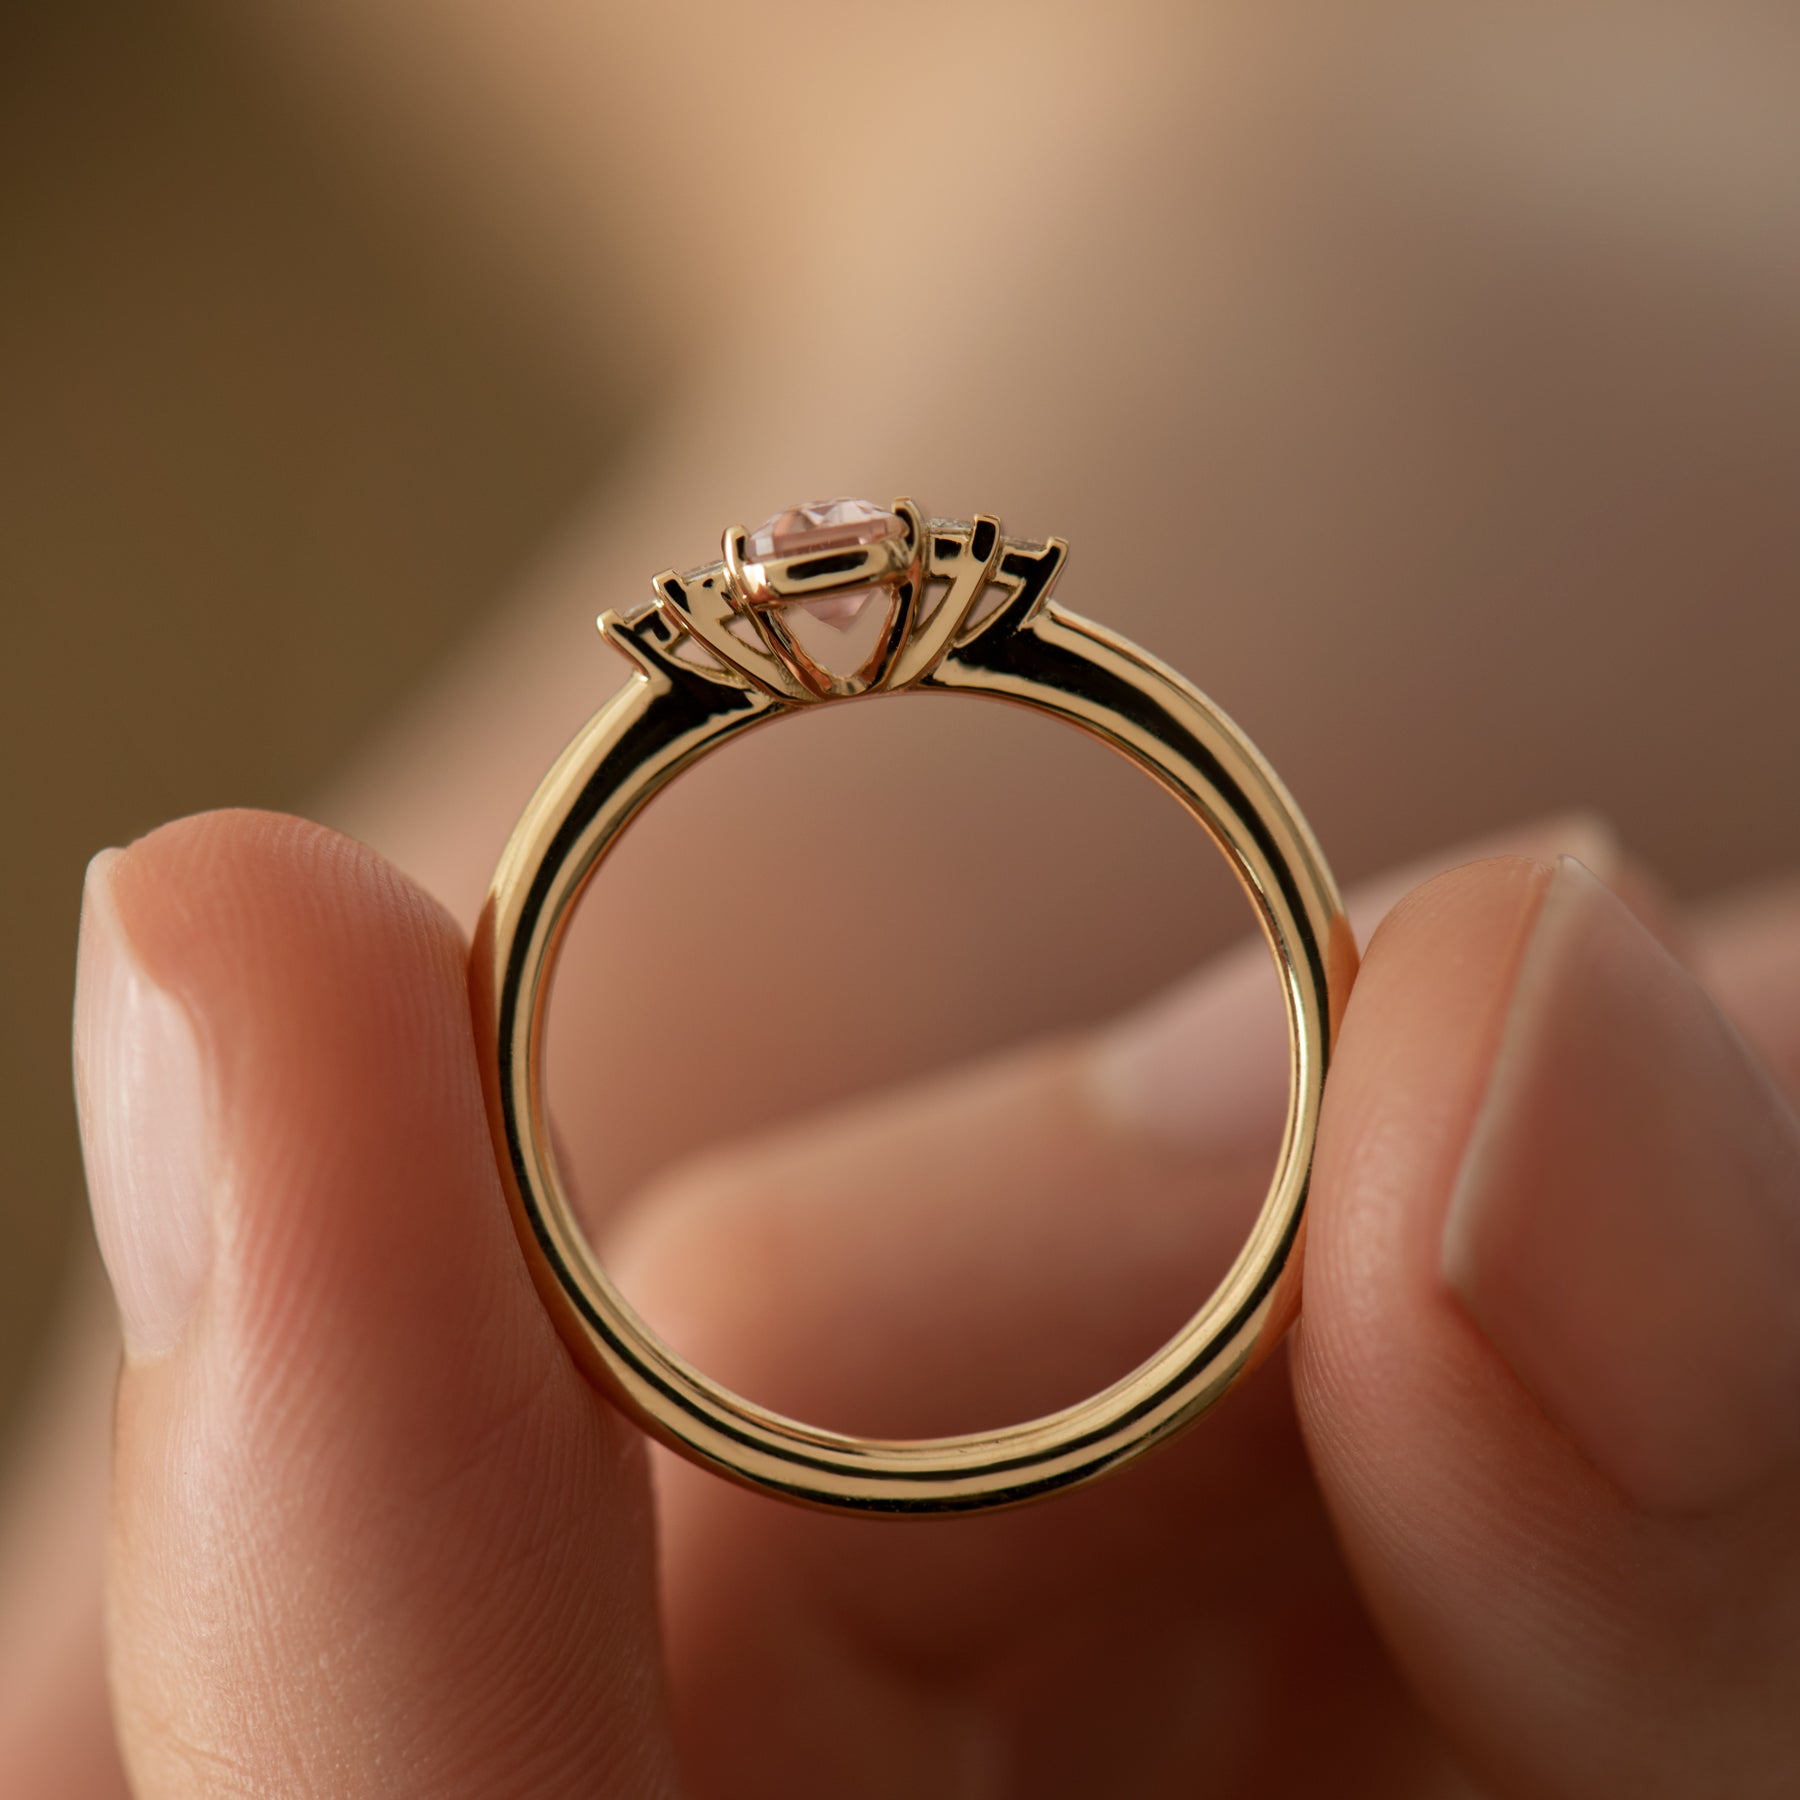 Ring Ceremony | Couple engagement pictures, Engagement ring photoshoot, Engagement  photography poses